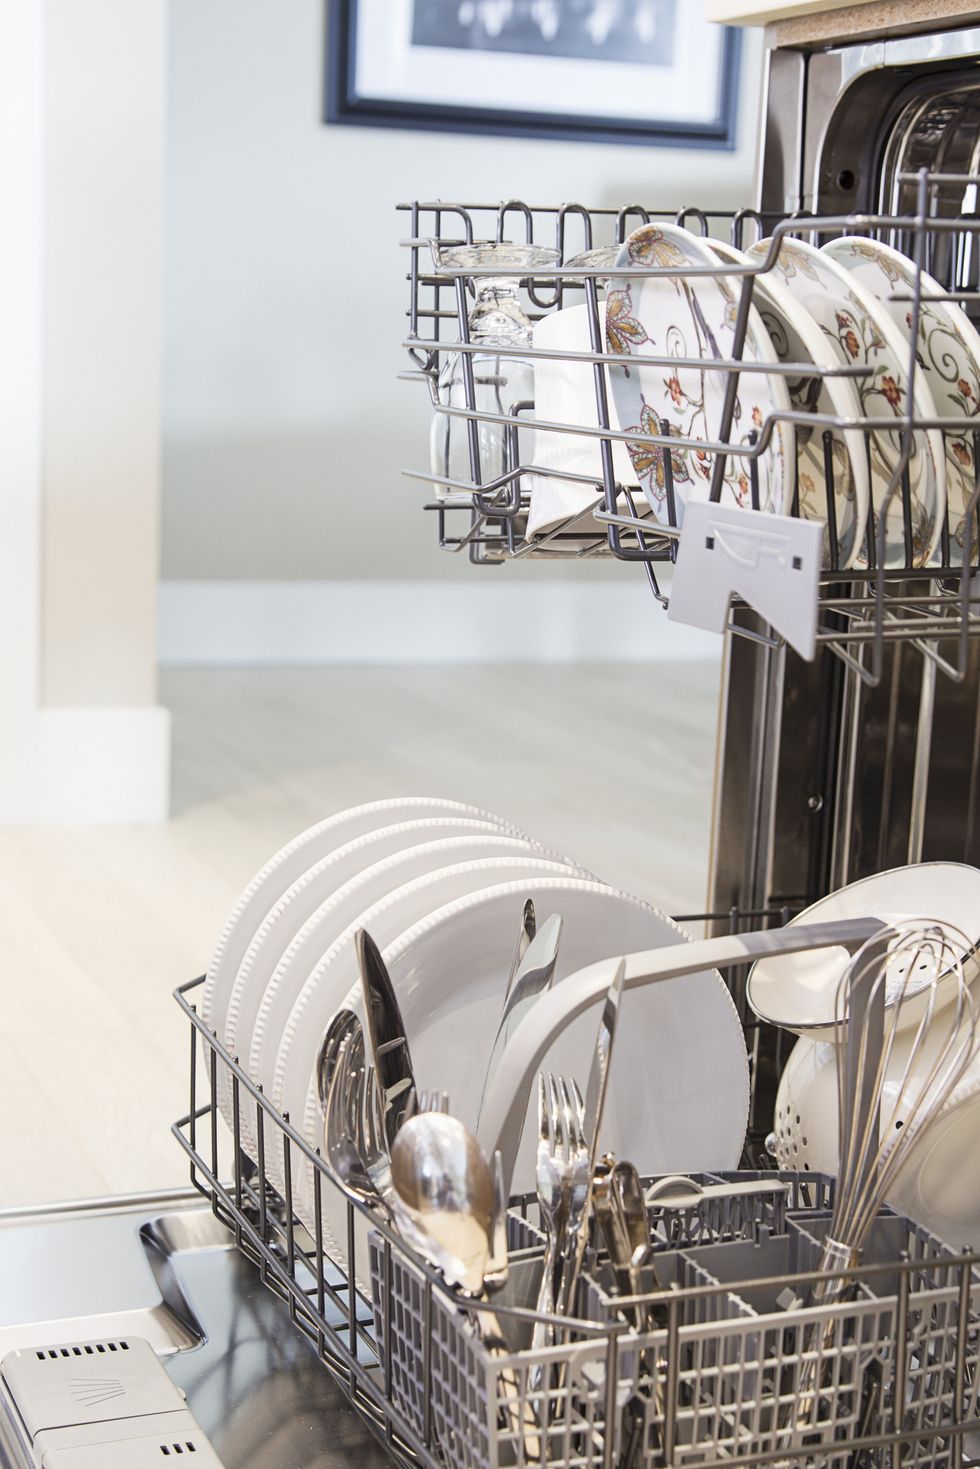 view of dishes in dishwasher